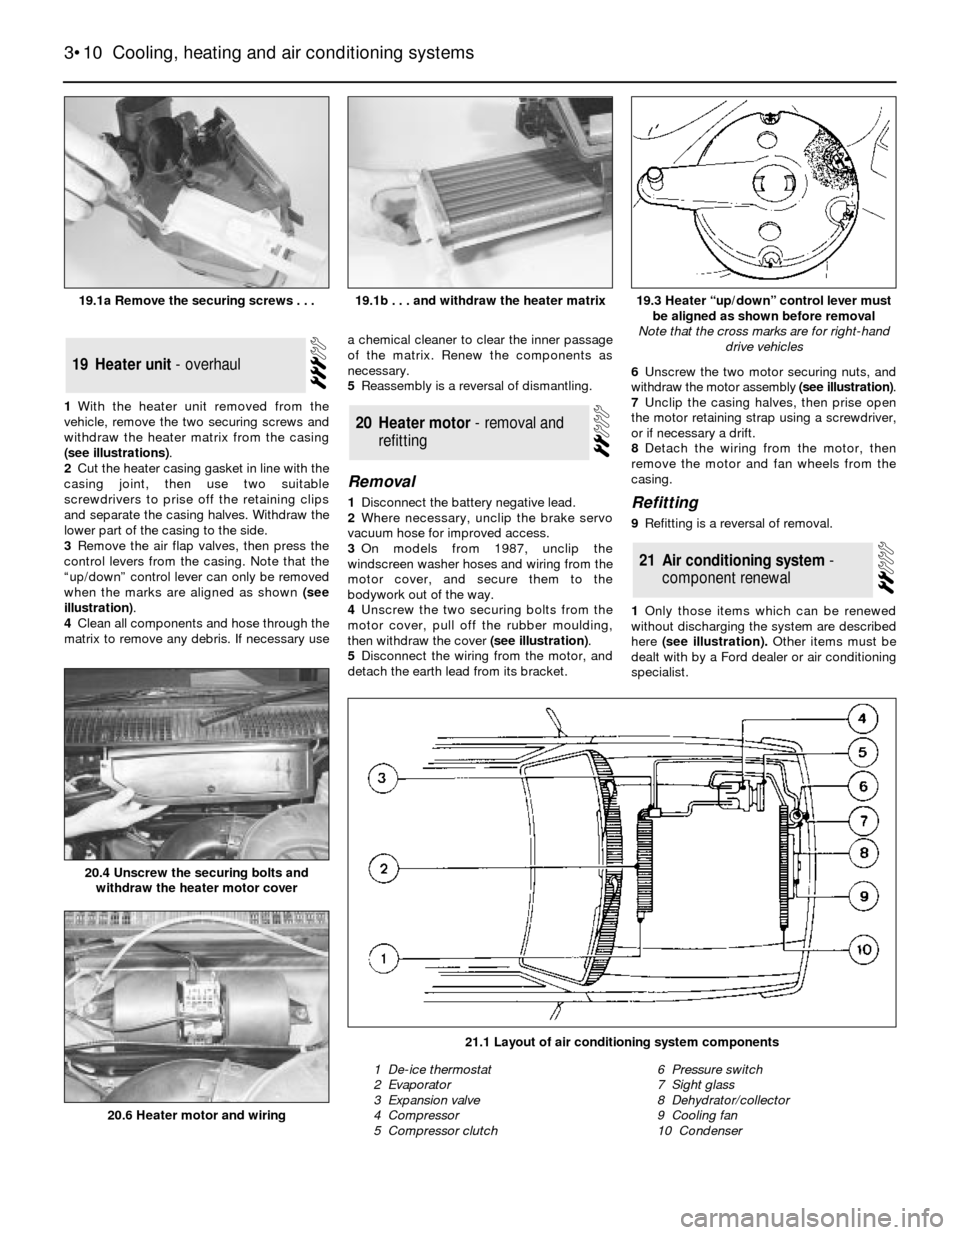 FORD SIERRA 1991 2.G Cooling And Air Conditioning Systems Workshop Manual 1With the heater unit removed from the
vehicle, remove the two securing screws and
withdraw the heater matrix from the casing
(see illustrations).
2Cut the heater casing gasket in line with the
casing